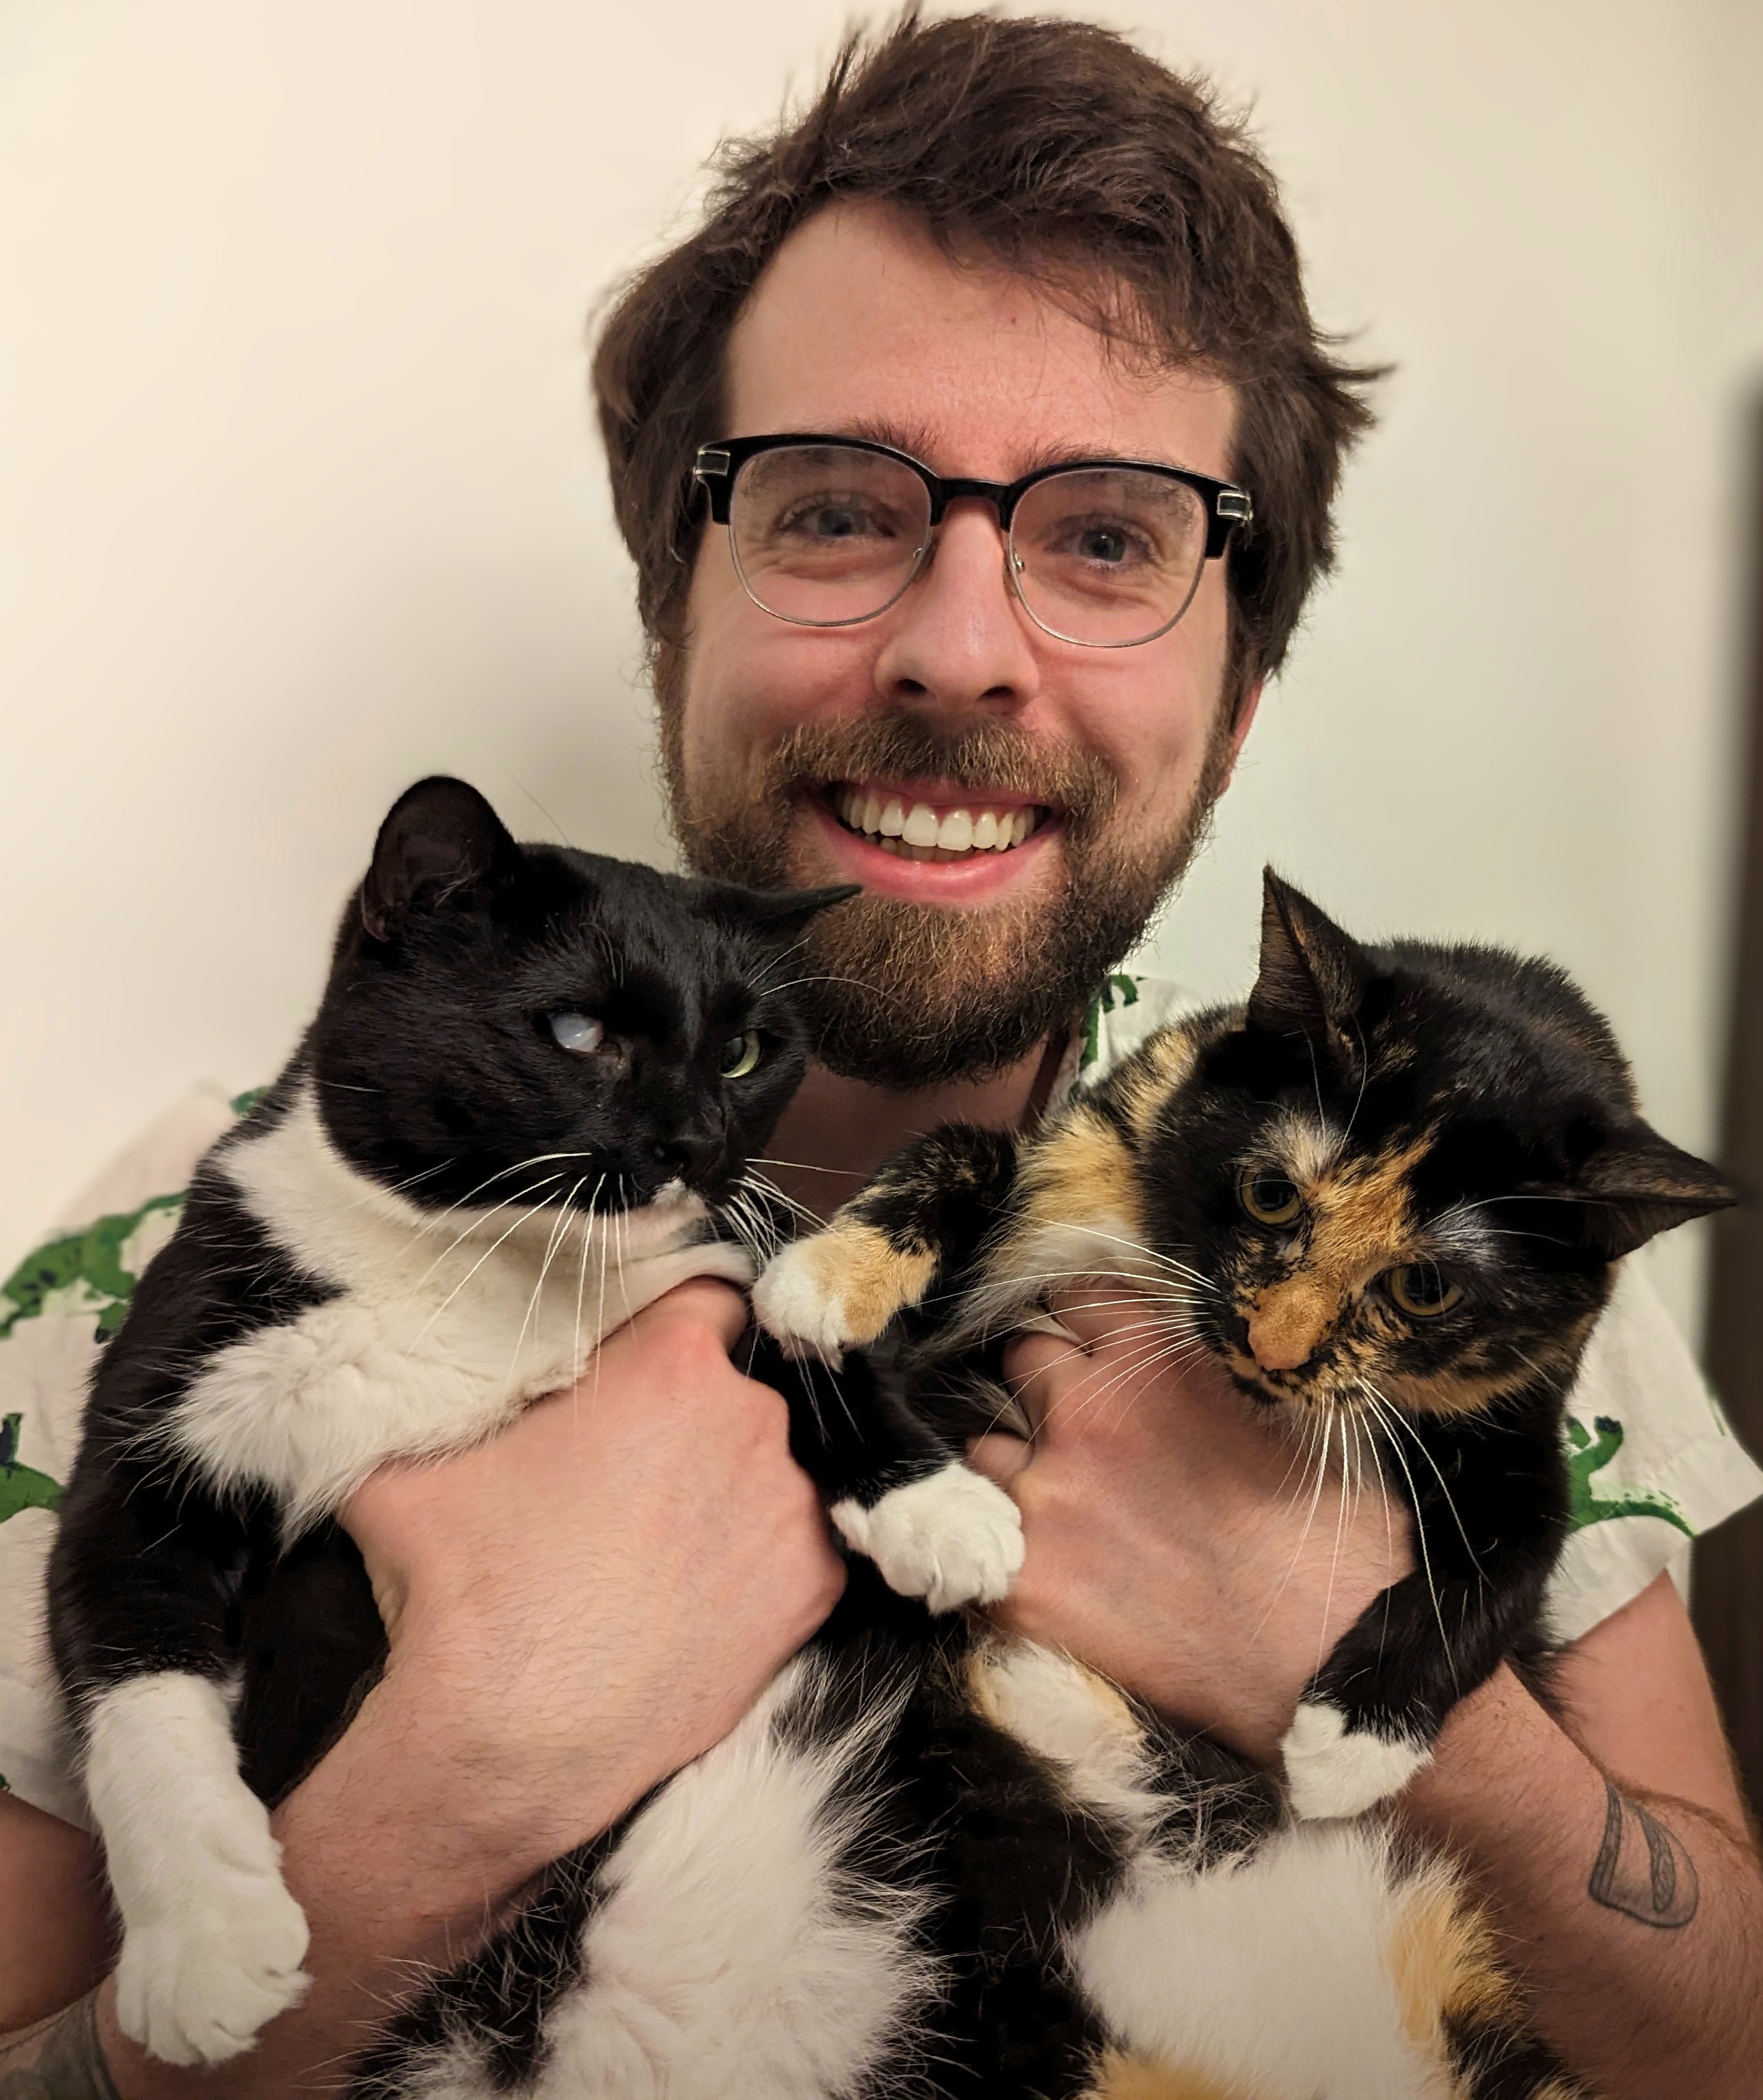 Picture of Alex Bates holding two cats